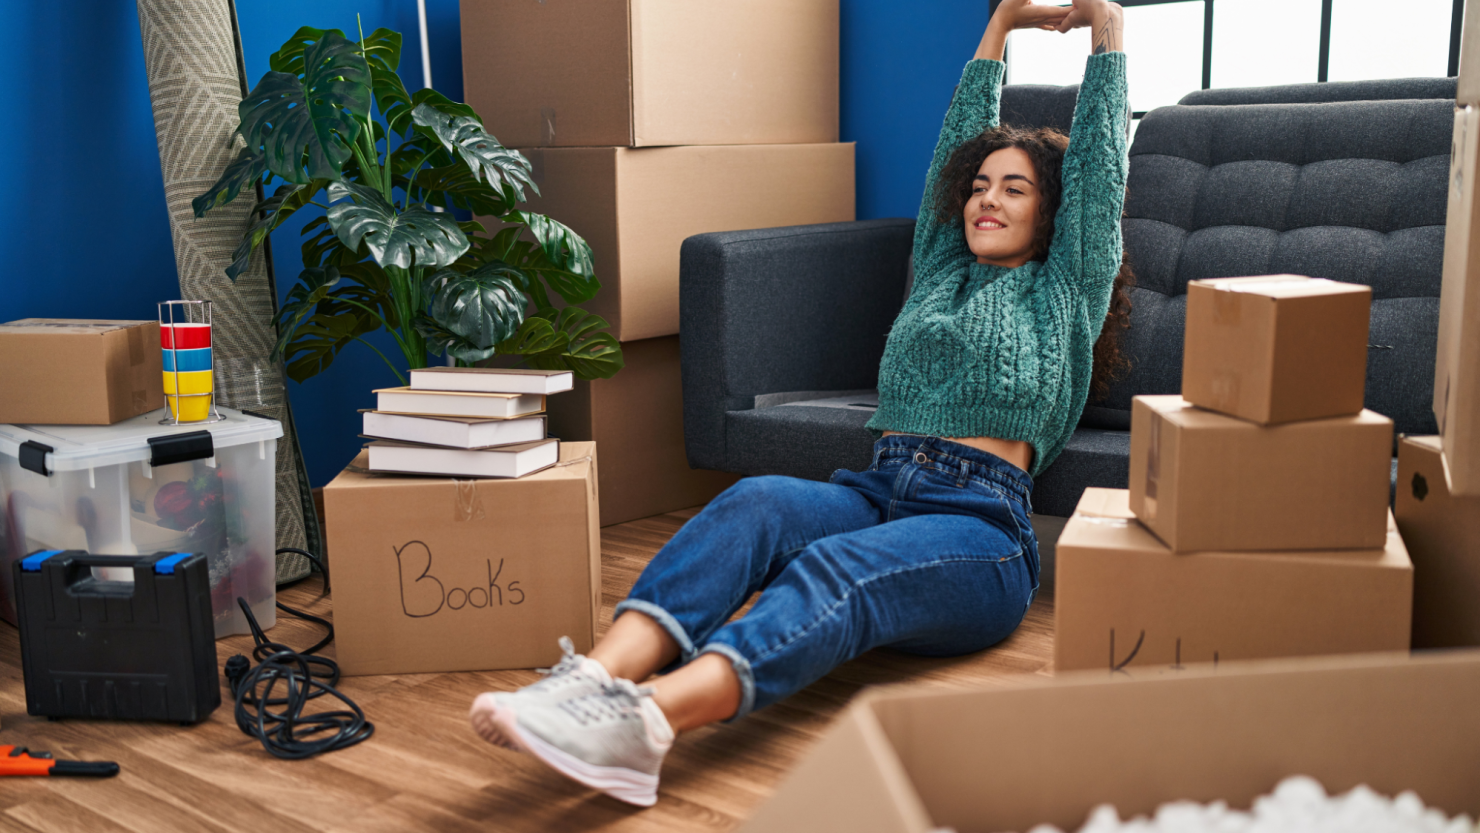 Woman relaxes in a living room amid moving boxes.